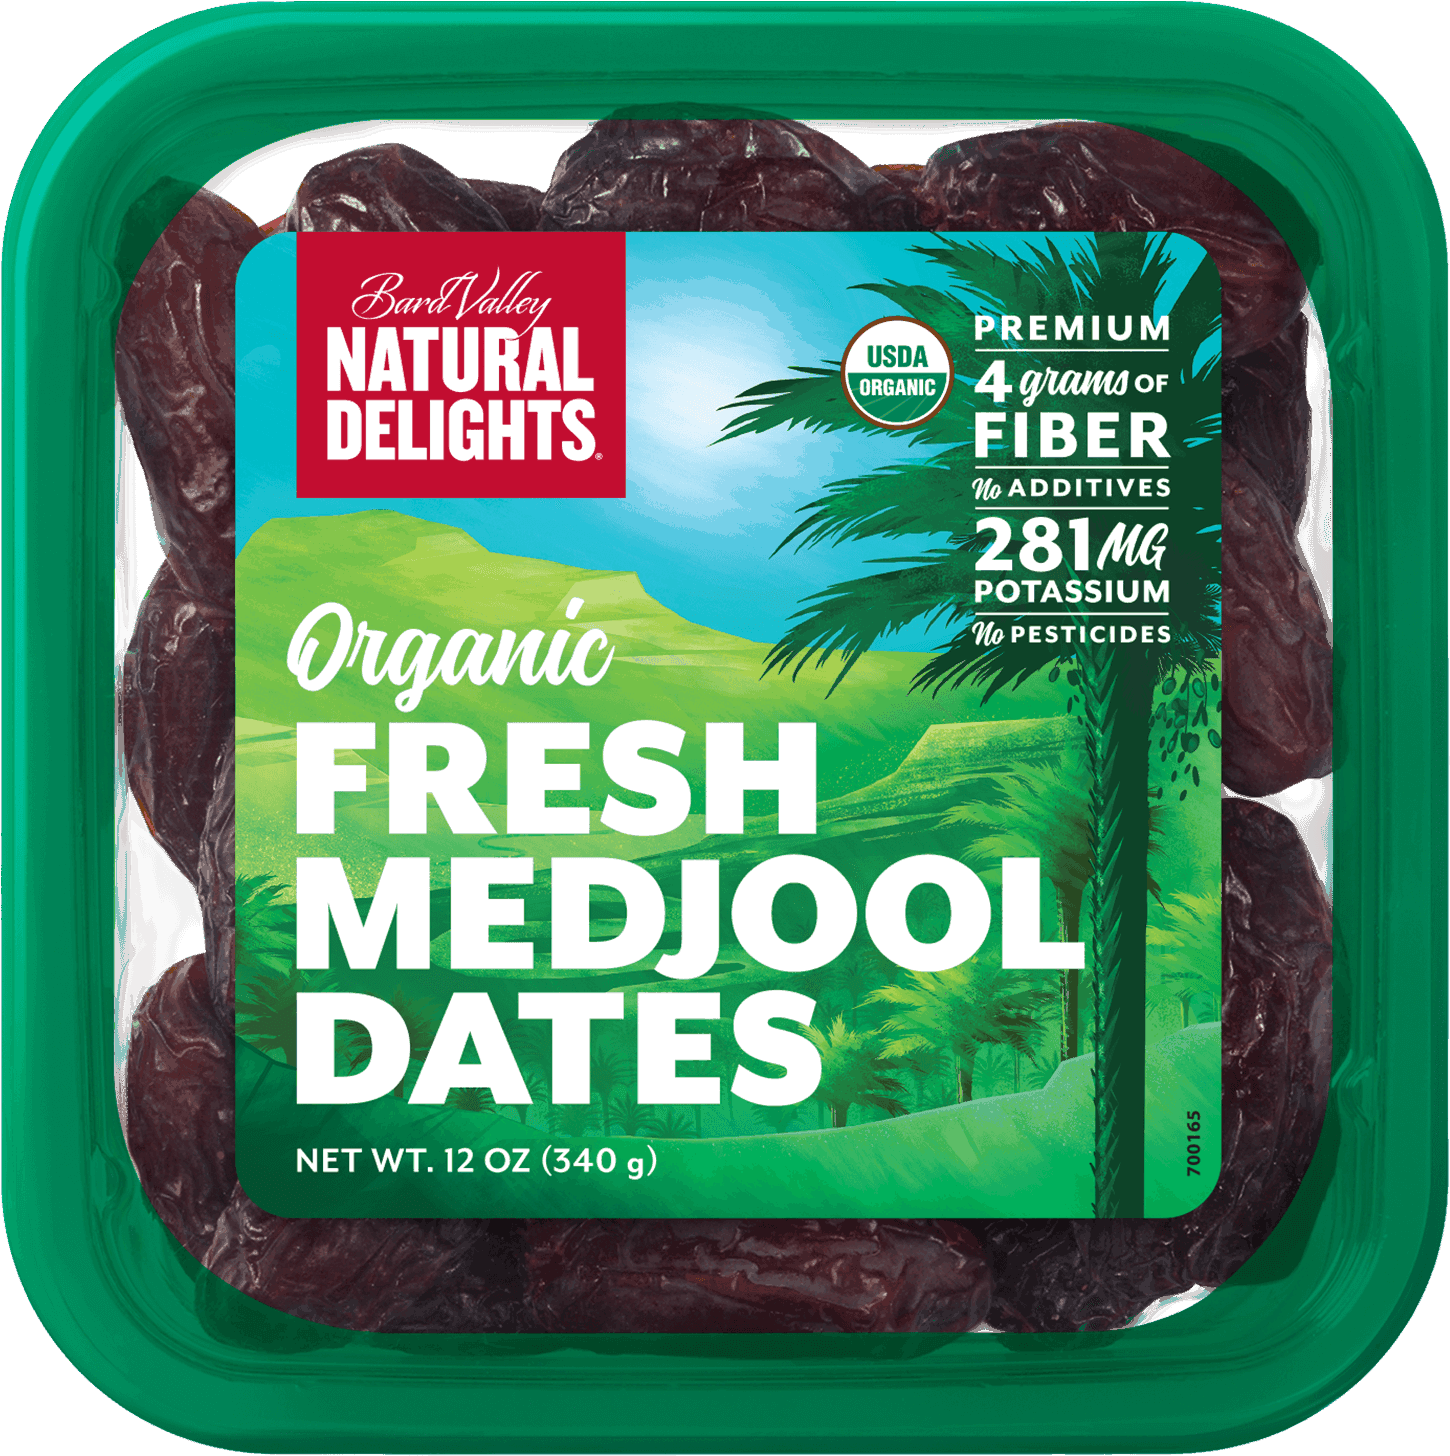 A Package Of Dates In A Green Container